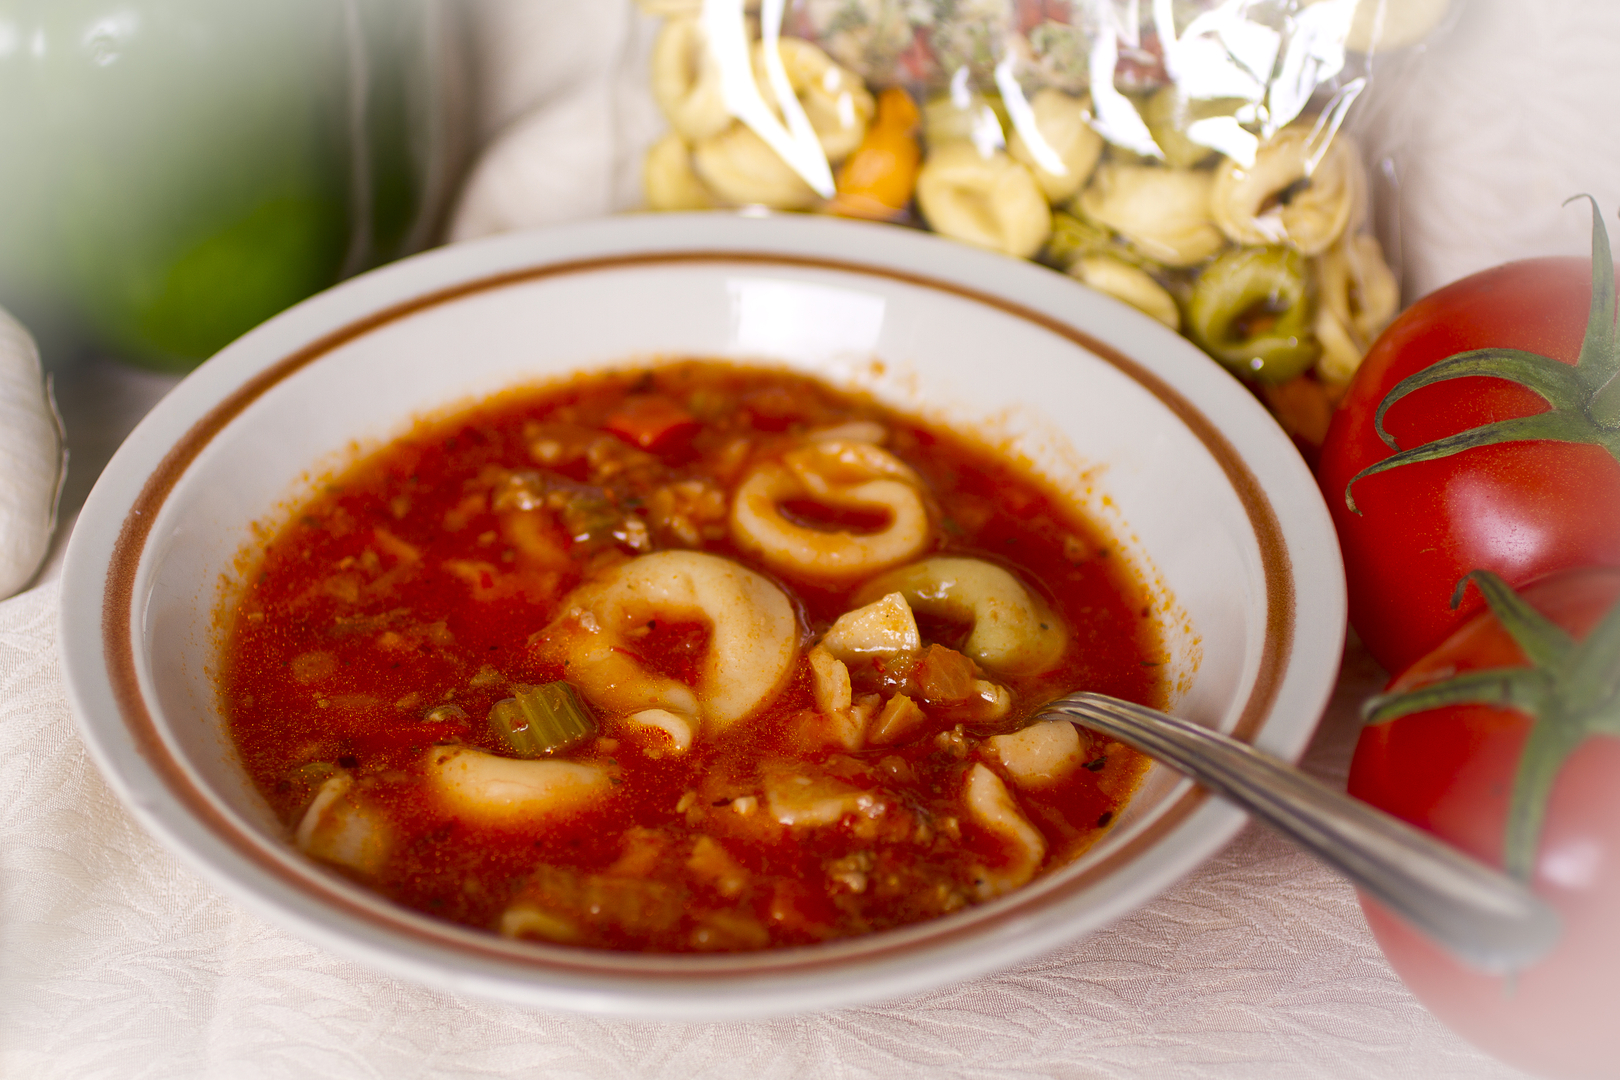 Cheese Tortellini Soup Mix
<br>
~ $7.50 ~